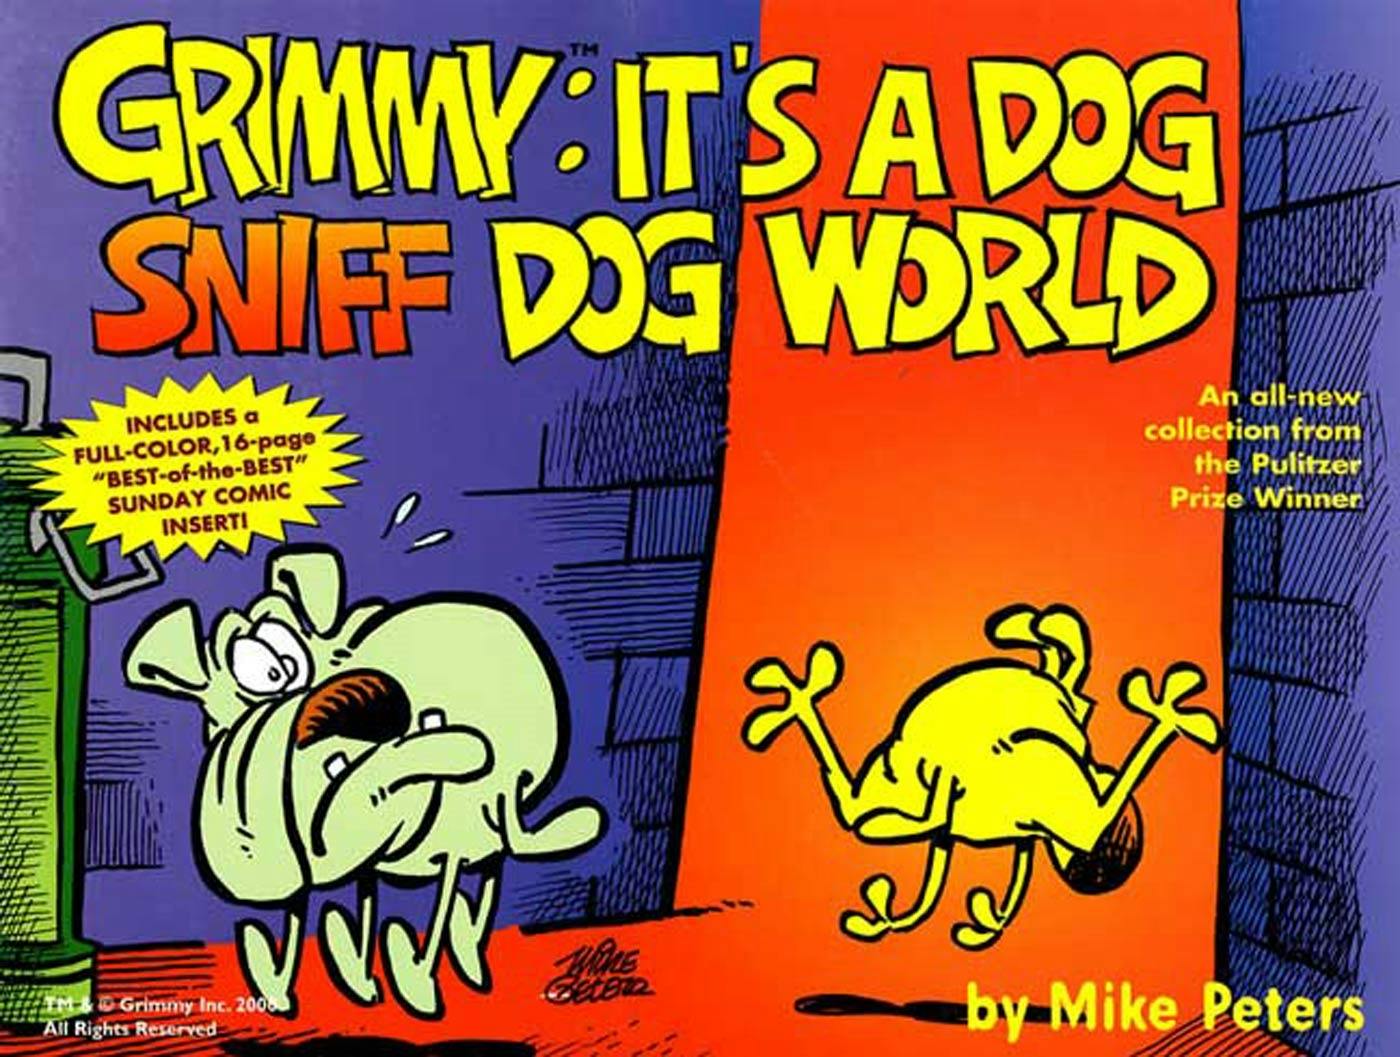 Cover for the book titled as: Grimmy: It's A Dog Sniff Dog World